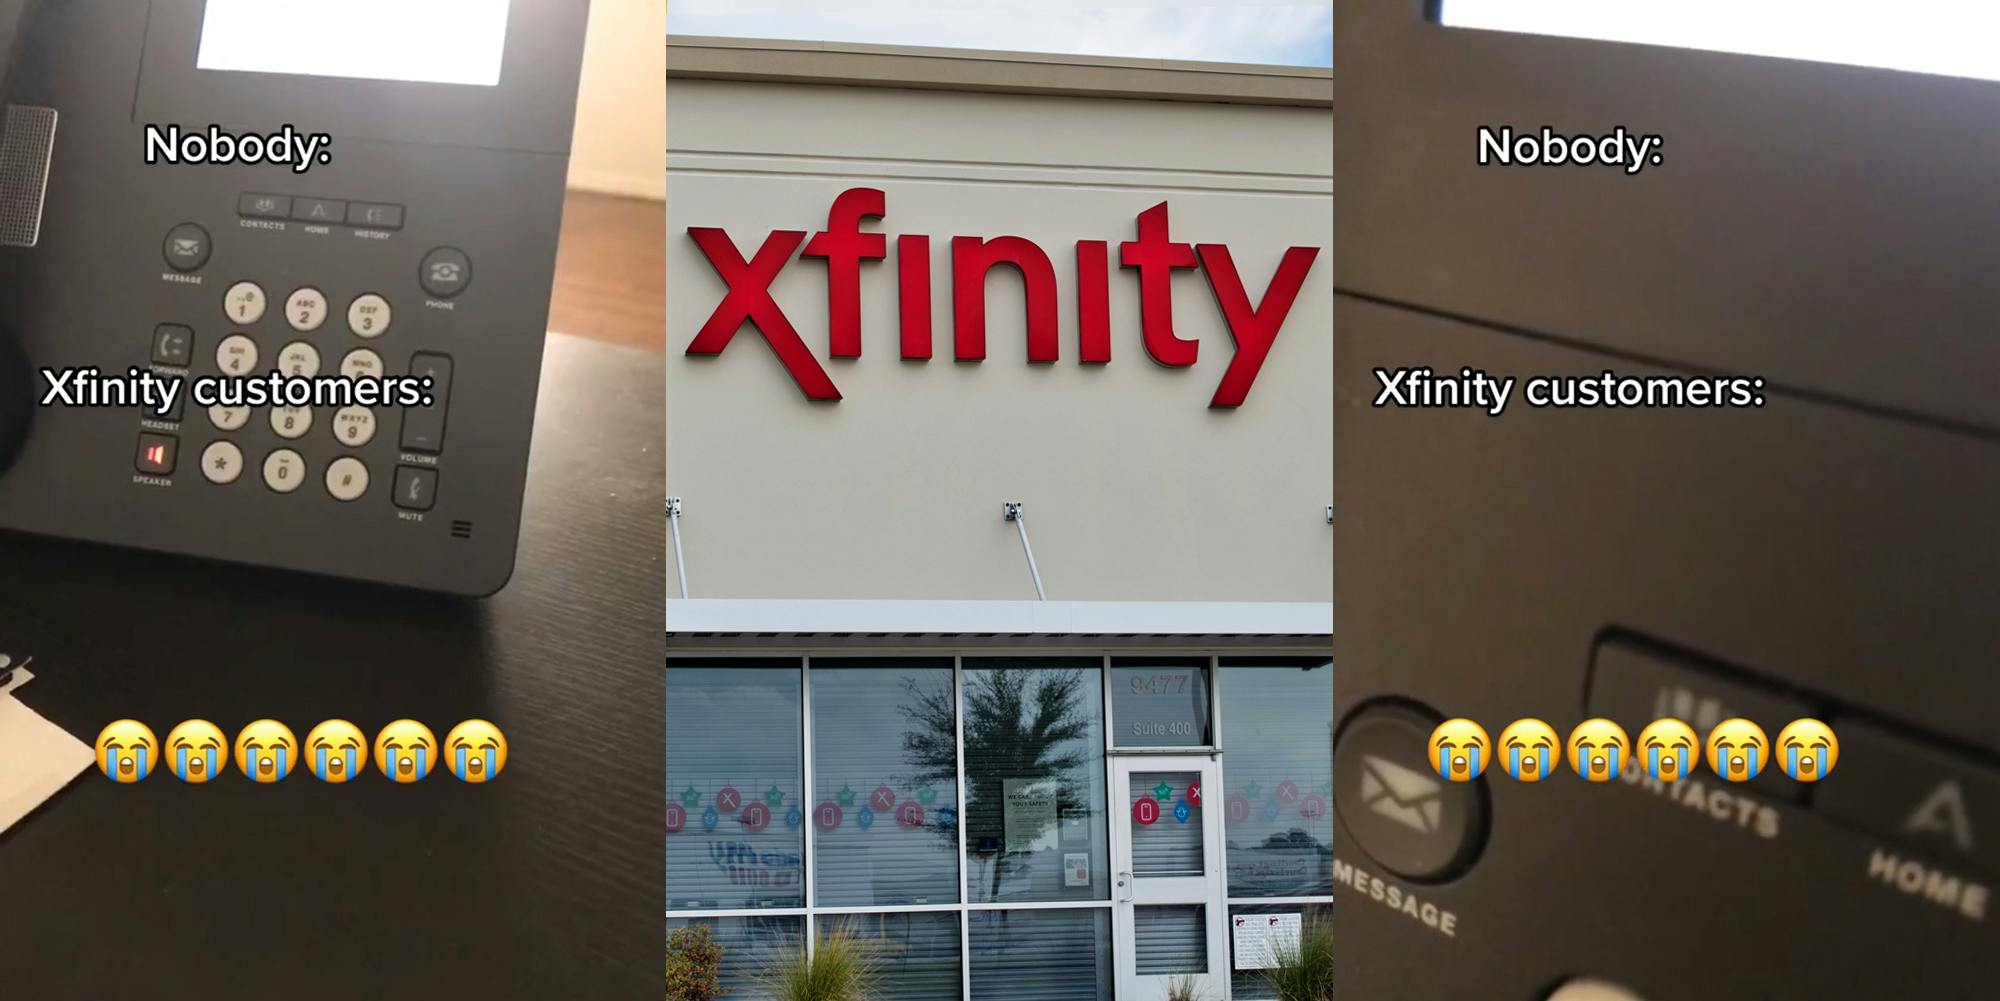 phone on table with caption "Nobody: Xfinity customers:" (l) Xfinity sign on building (c) phone on table with caption "Nobody: Xfinity customers:" (r)